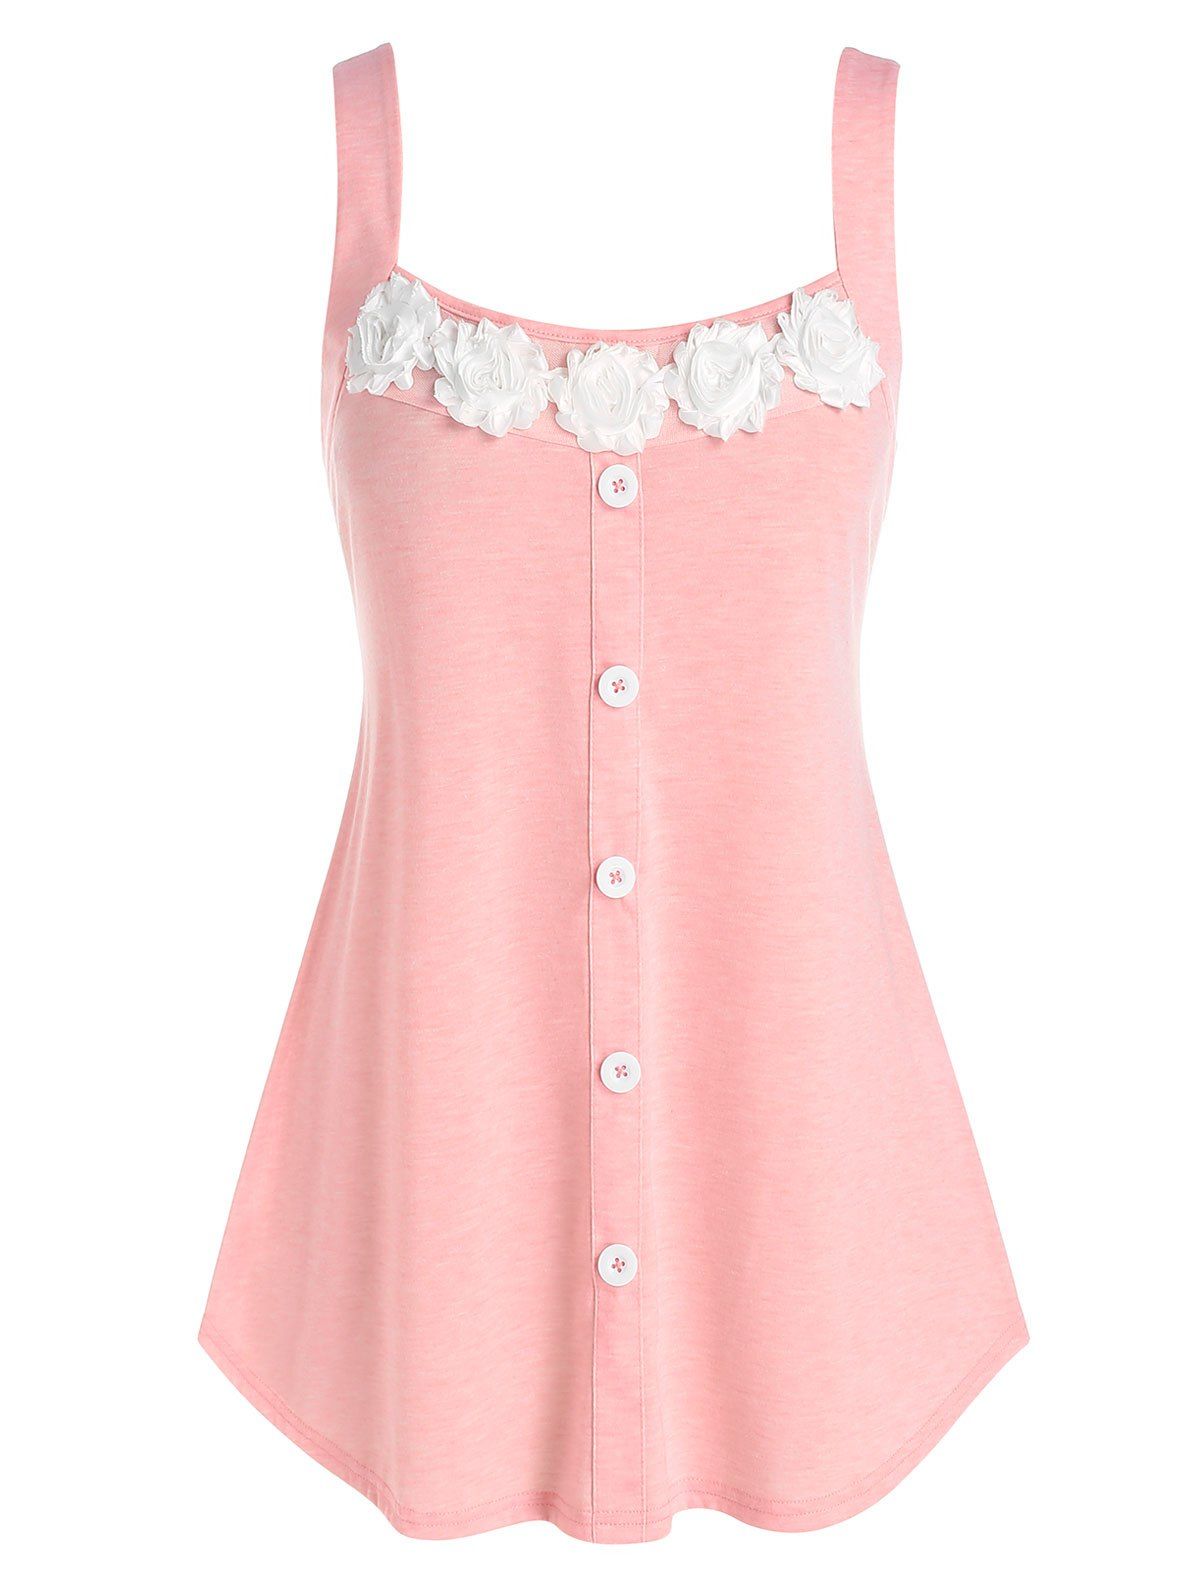 Plus Size Flower Embellished Buttoned Tunic Tank Top - LIGHT PINK 4X